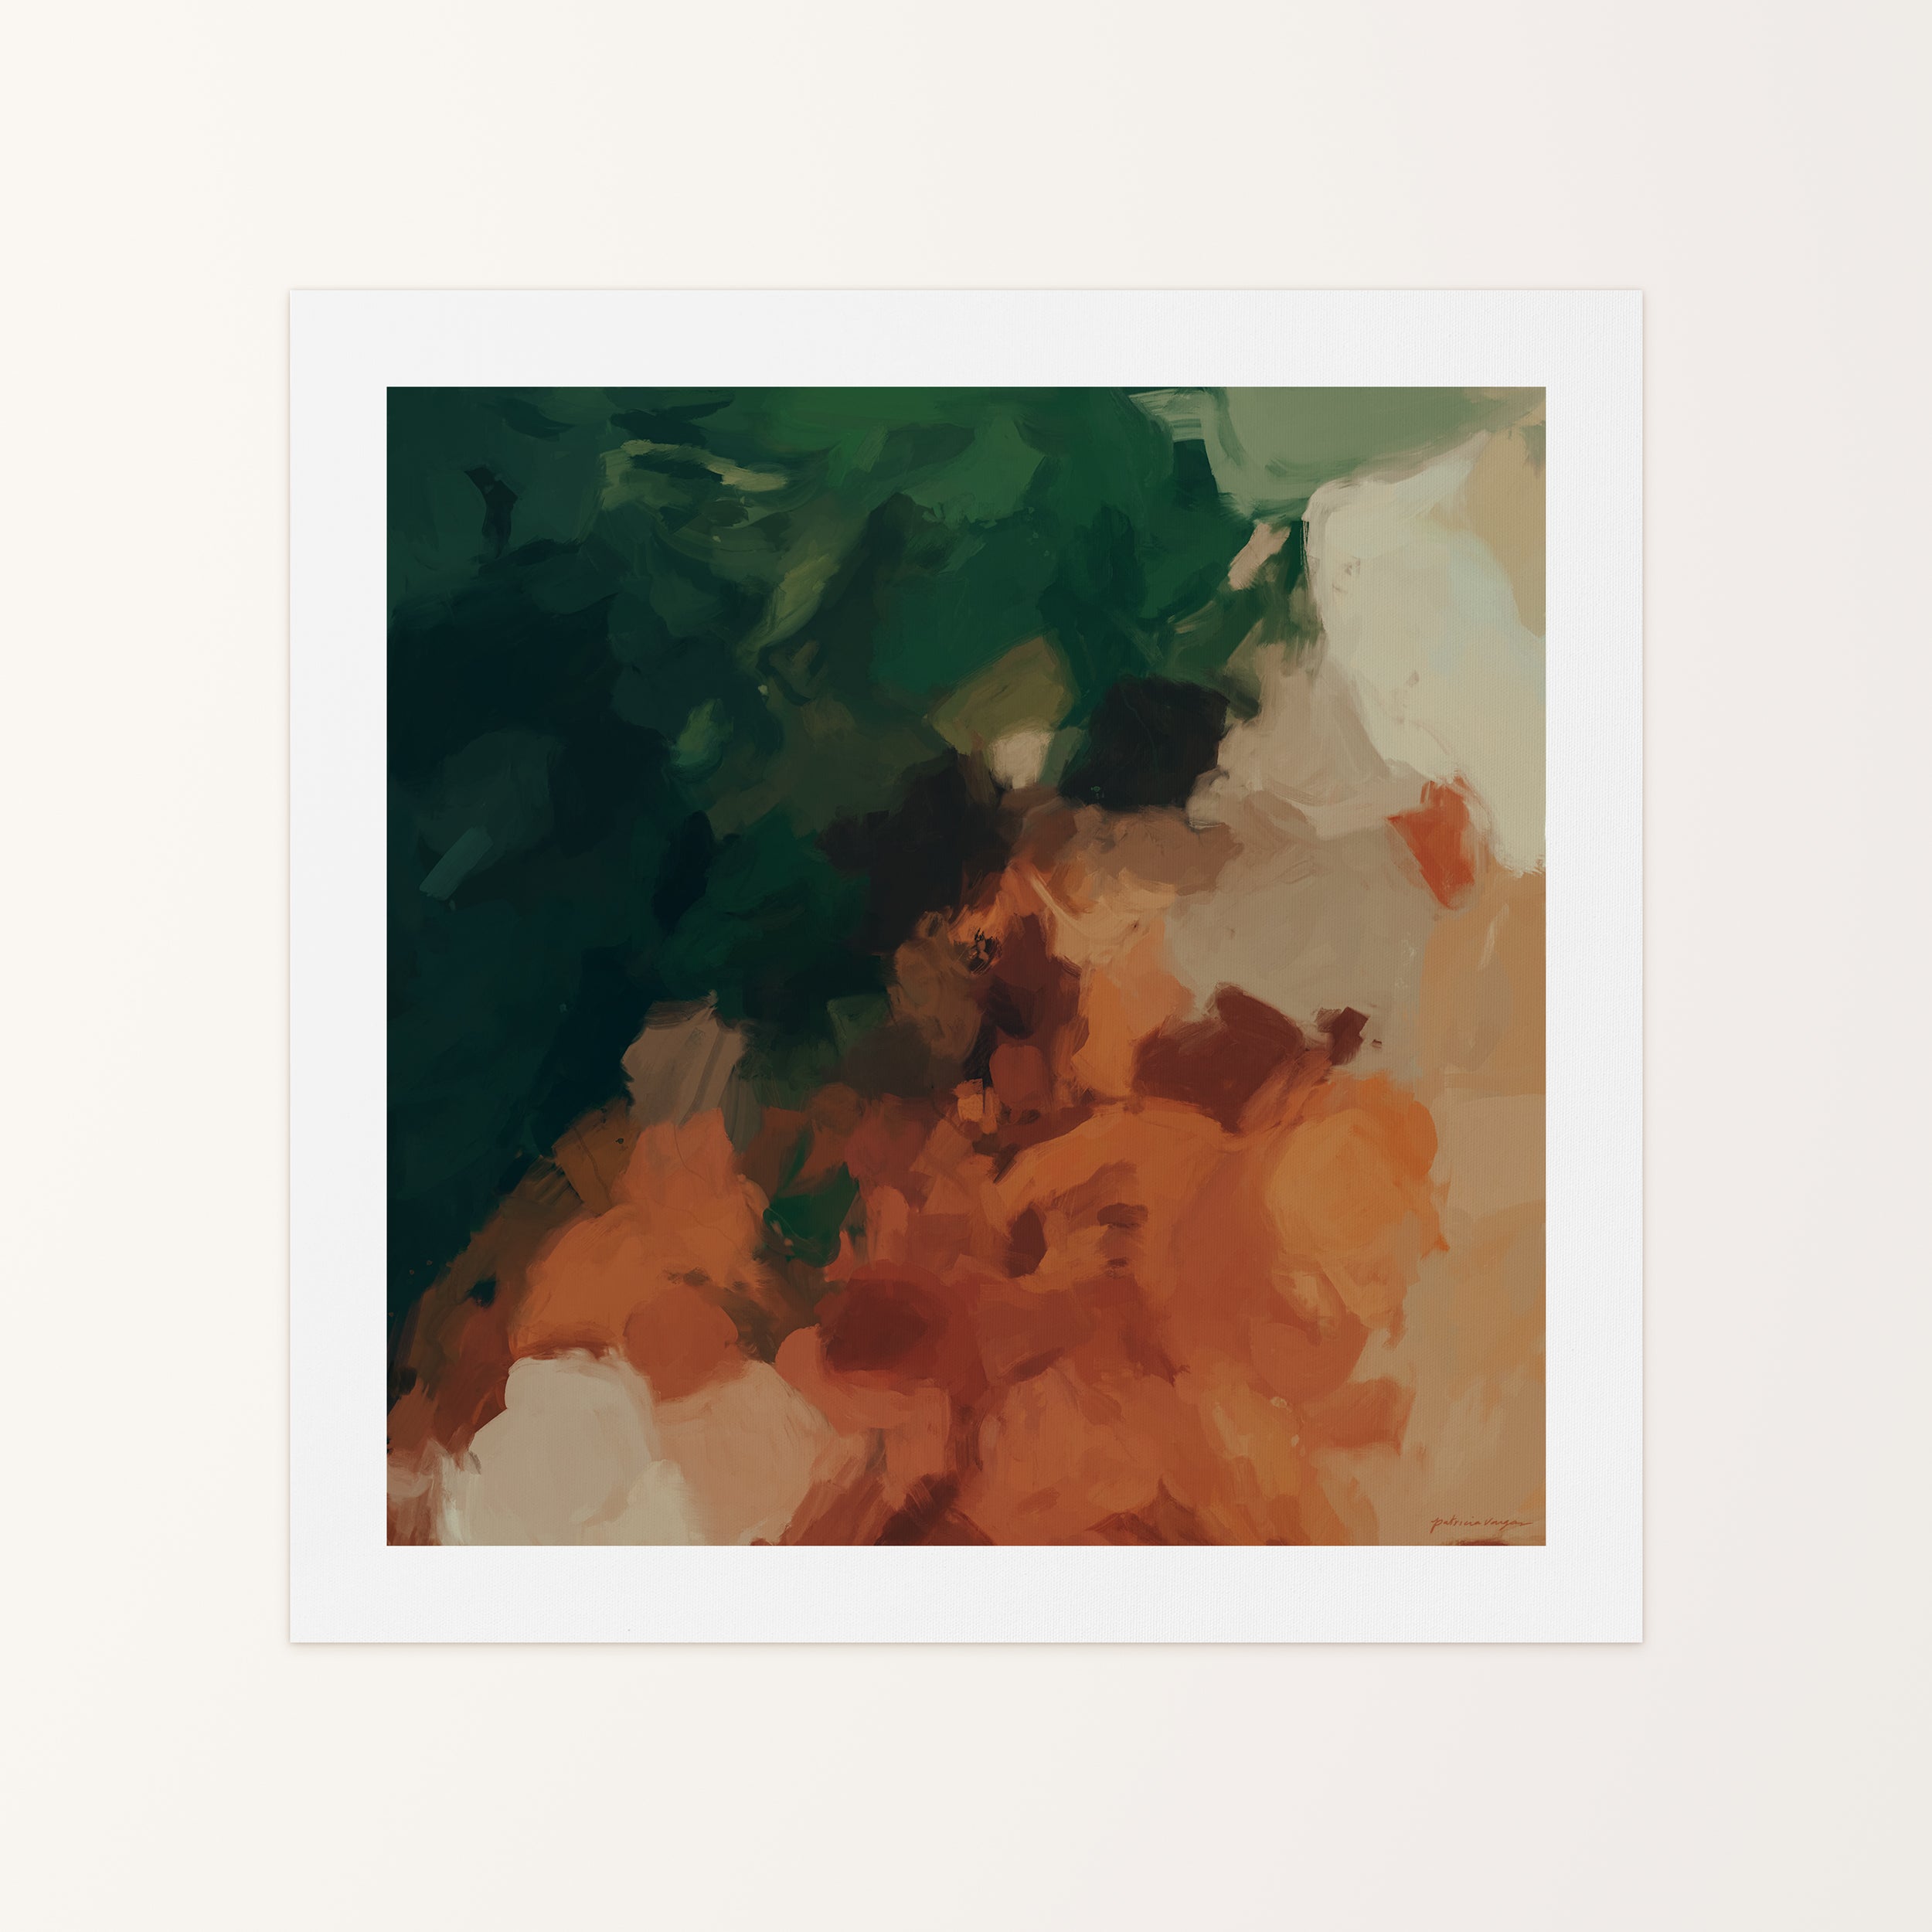 Cedar, green and orange  colorful abstract canvas wall art print by Parima Studio